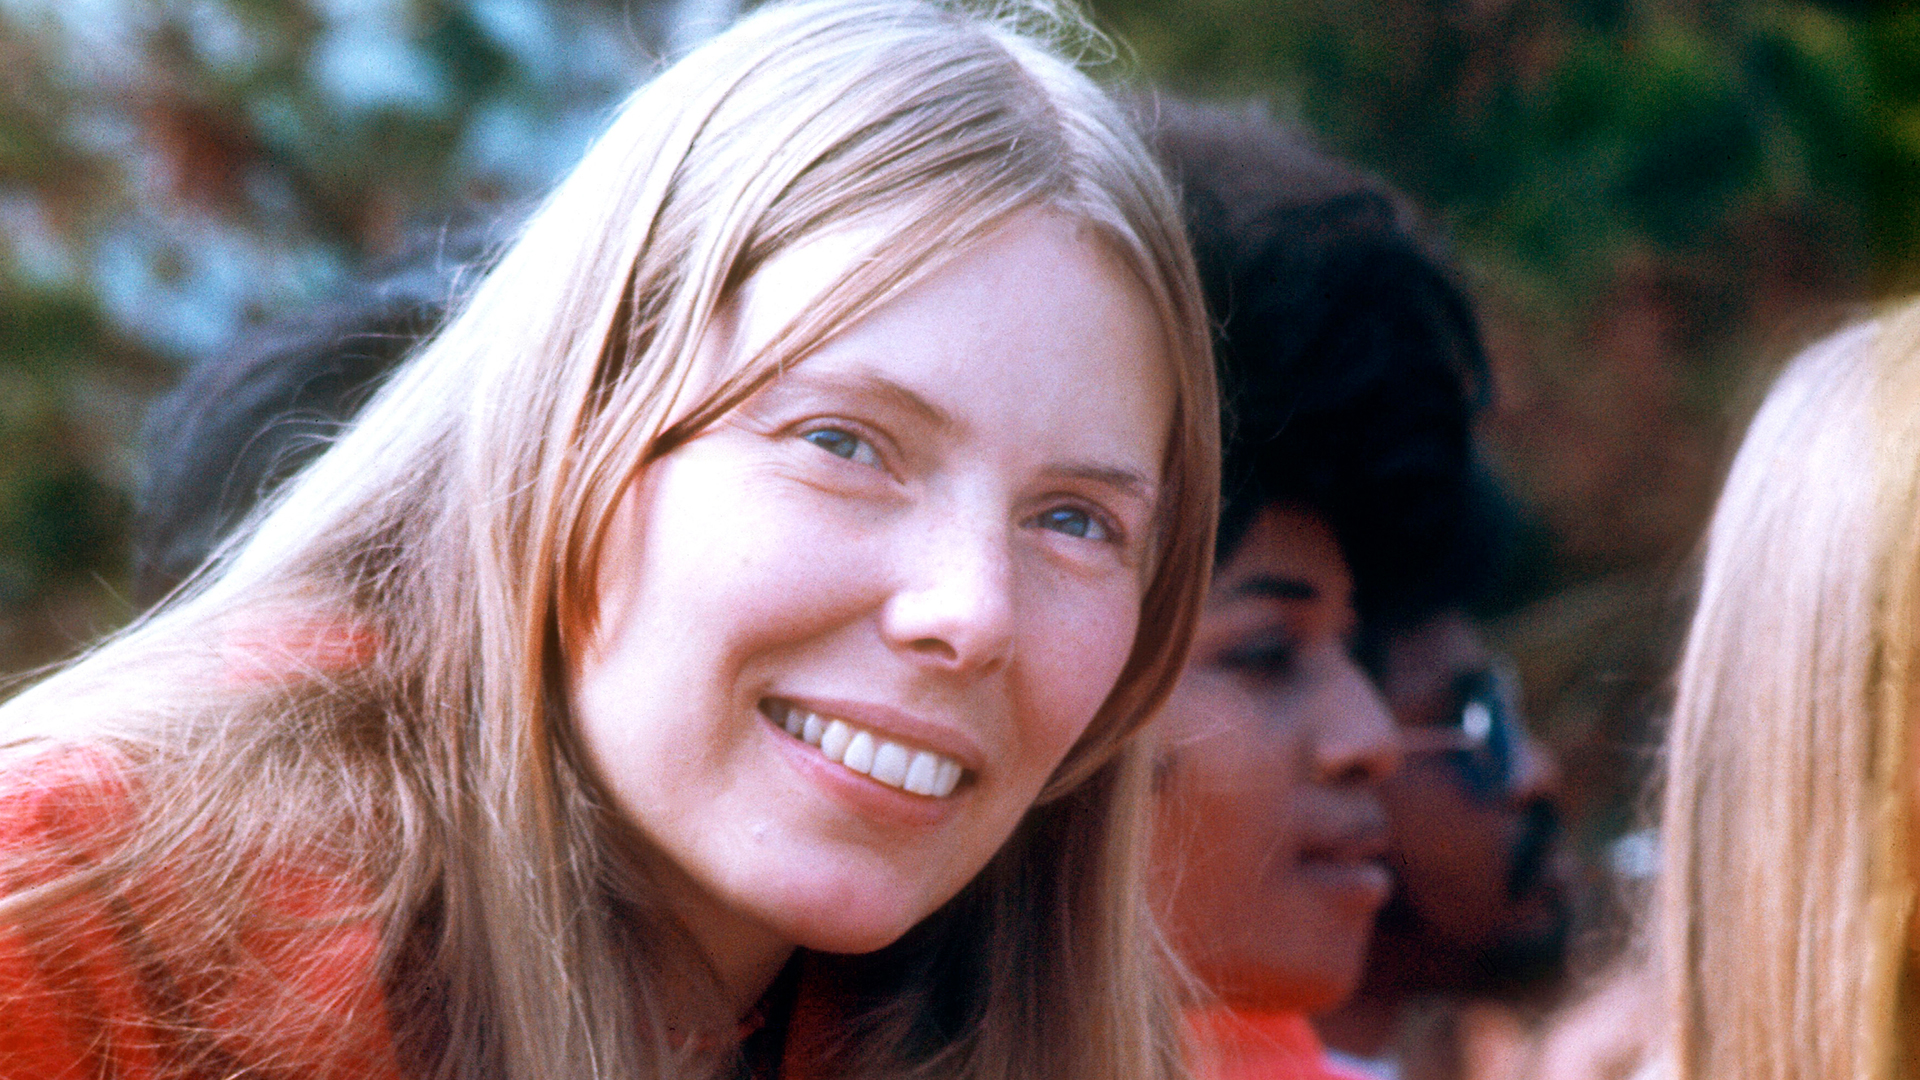 February 1, 1969: Joni Mitchell Performed at Carnegie Hall and Her Popularity Began to Soar